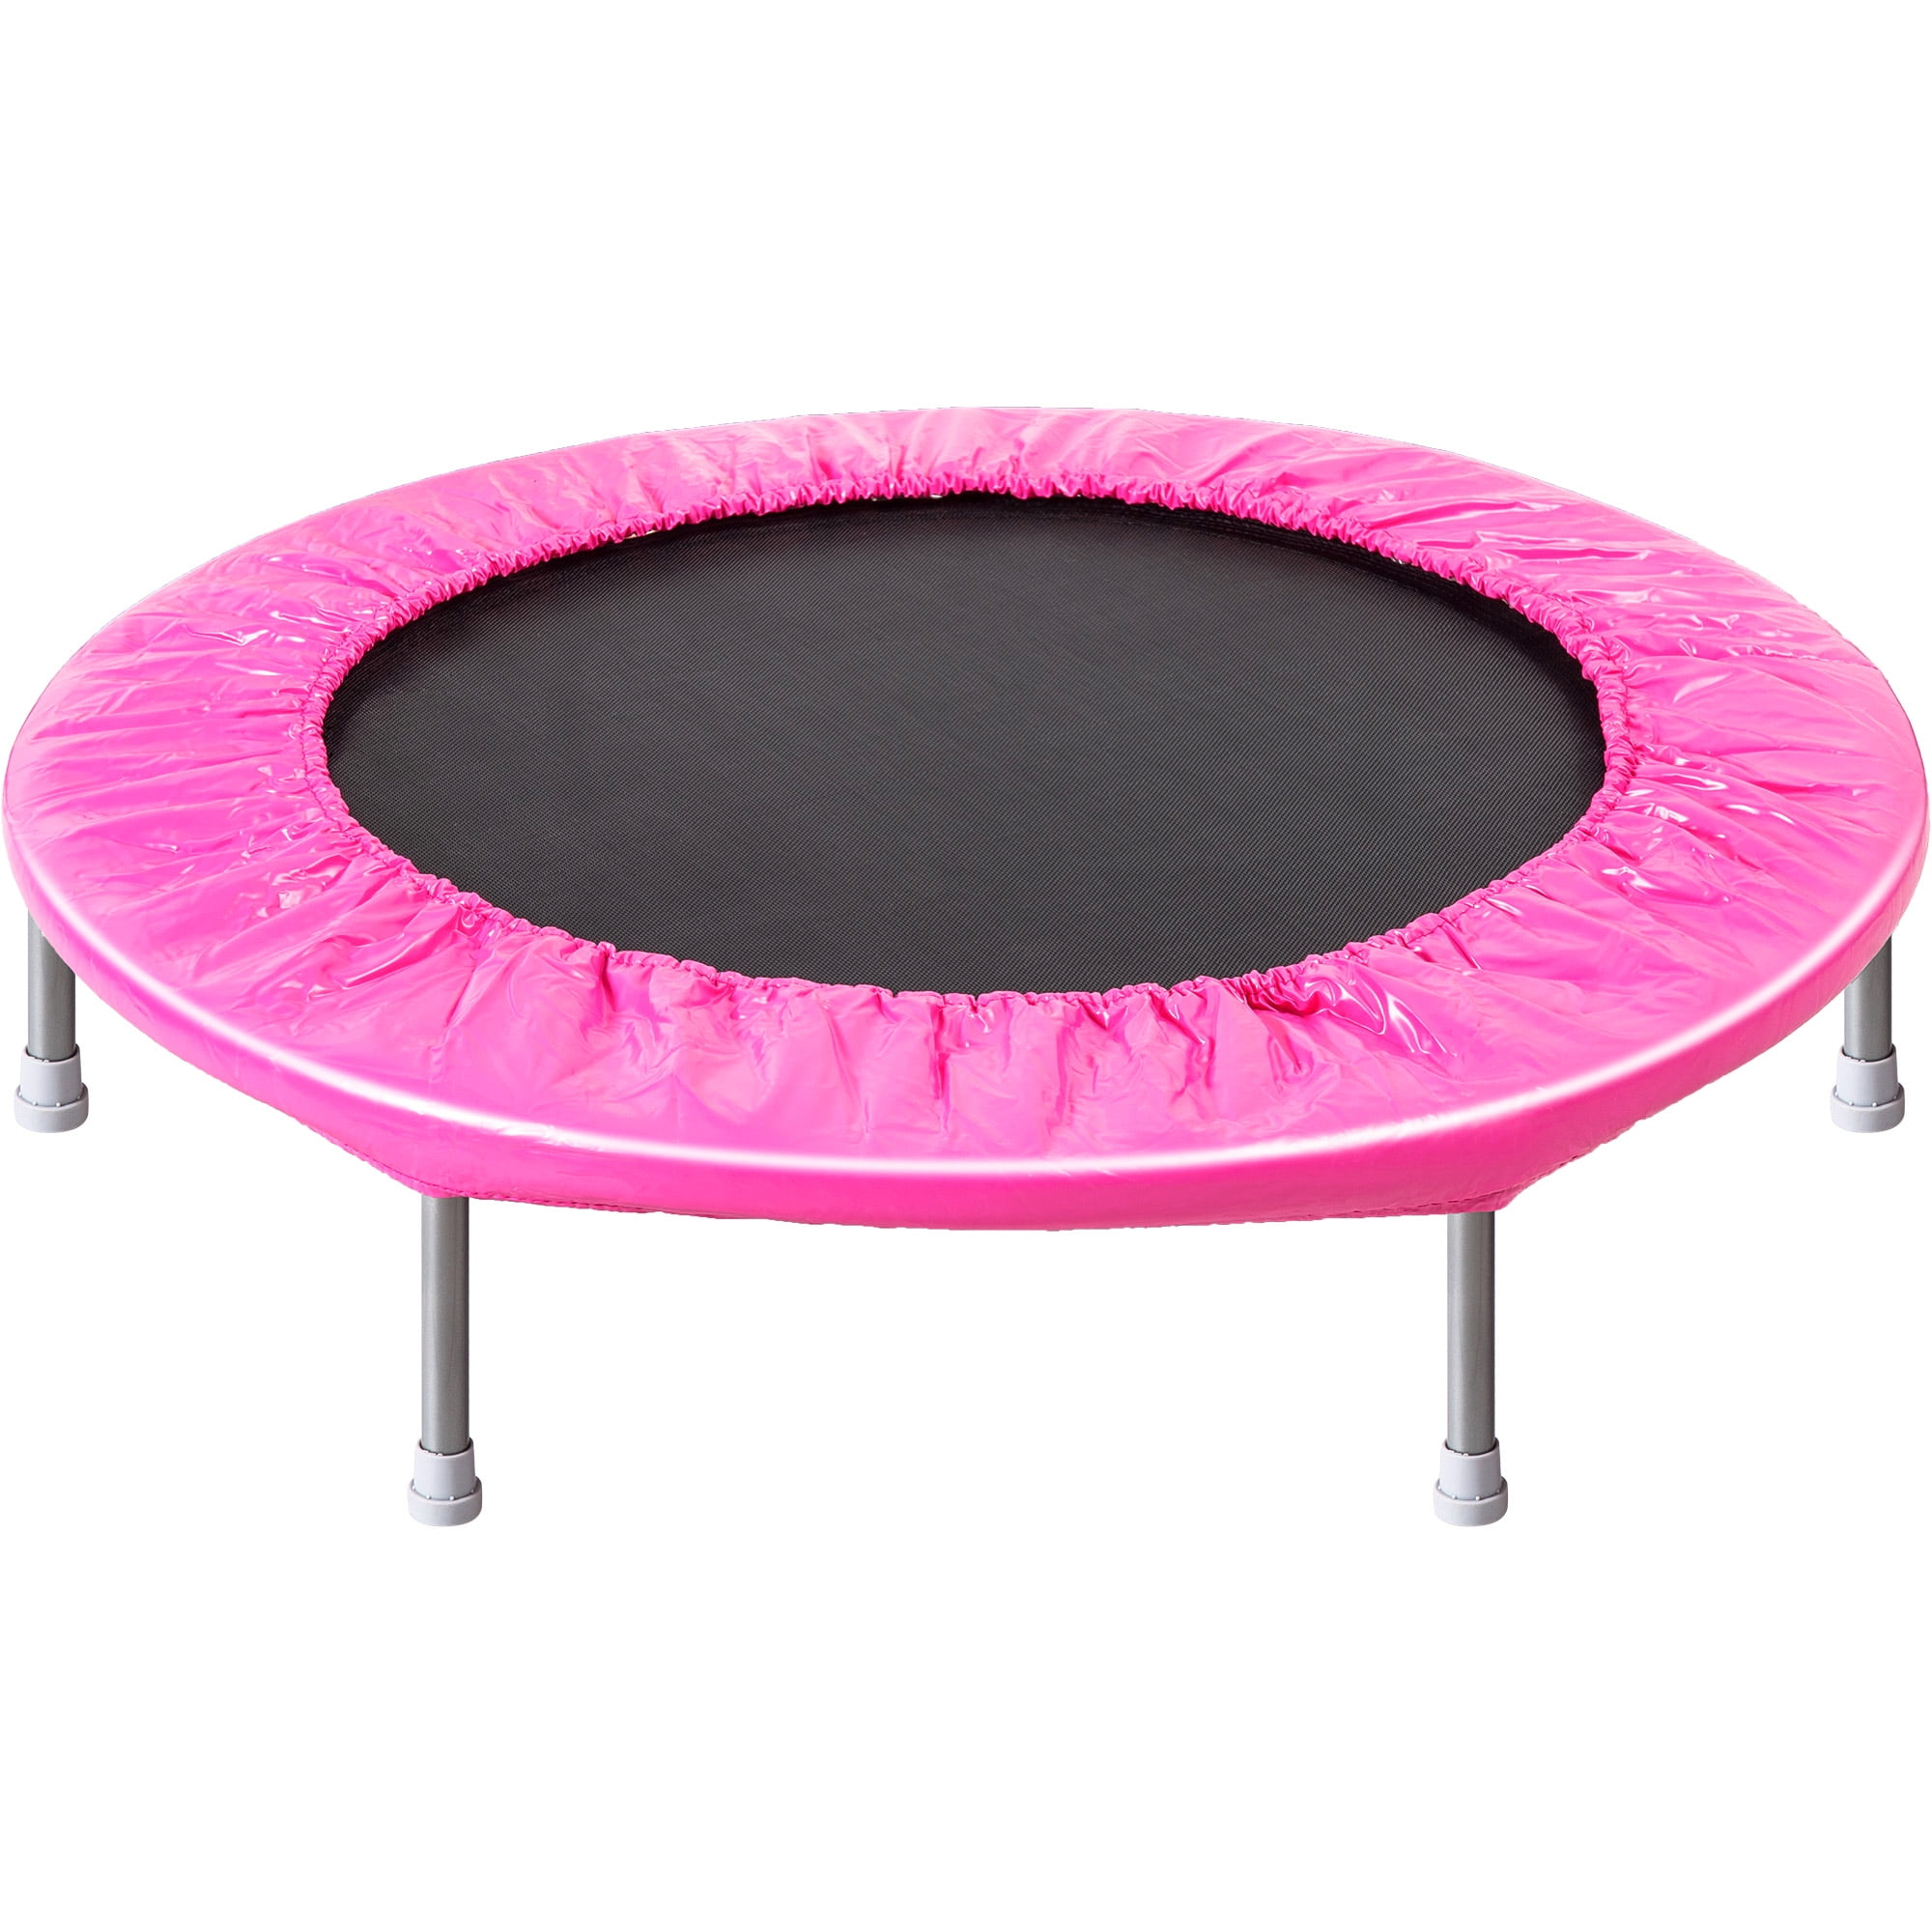 Piscis 38 Inch Rebounder Fitness Trampoline for Adults Kids, Mini Fitness Trampoline with Padding and Springs Elastic Safe for Indoor Outdoor Exercise Workout, Exercise Trampoline Holds 180 lb